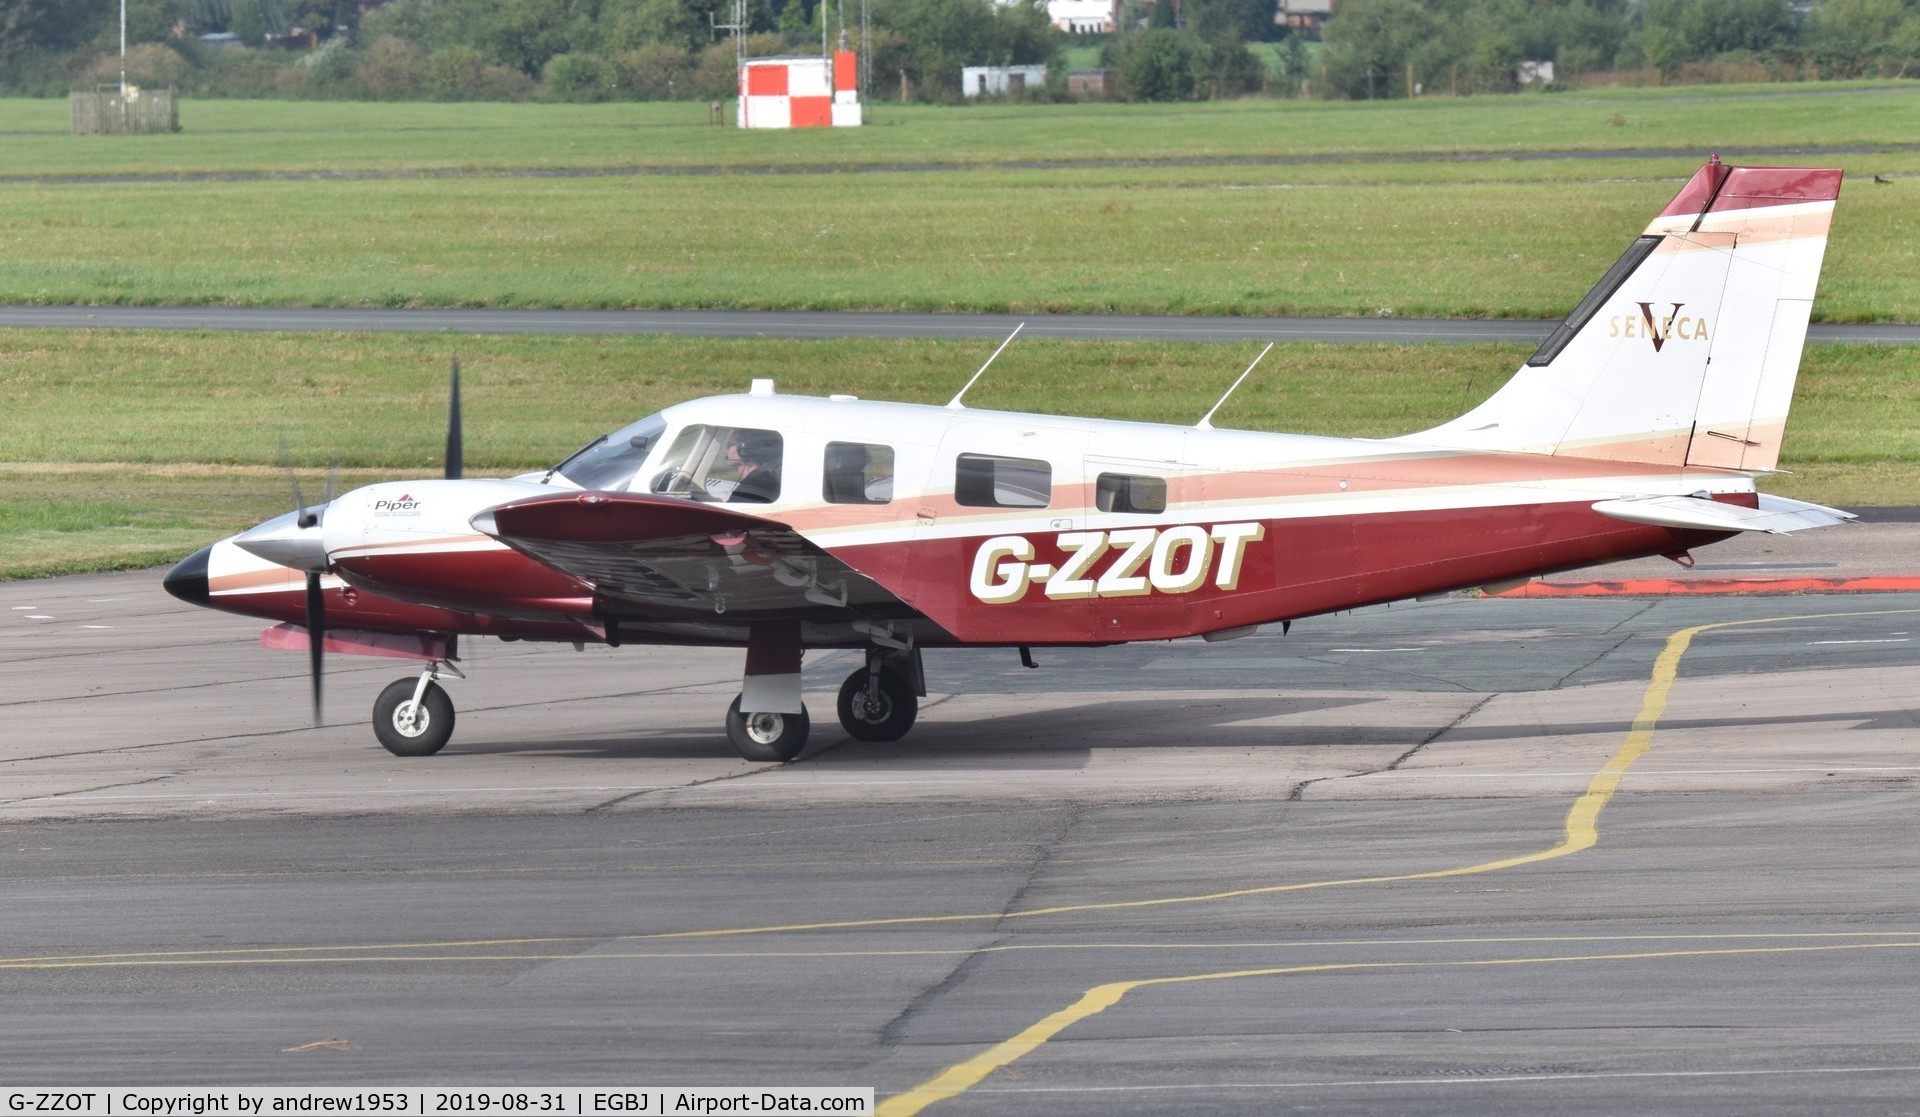 G-ZZOT, 1999 Piper PA-34-220T Seneca V C/N 3449108, G-ZZOT at Gloucestershire Airport.